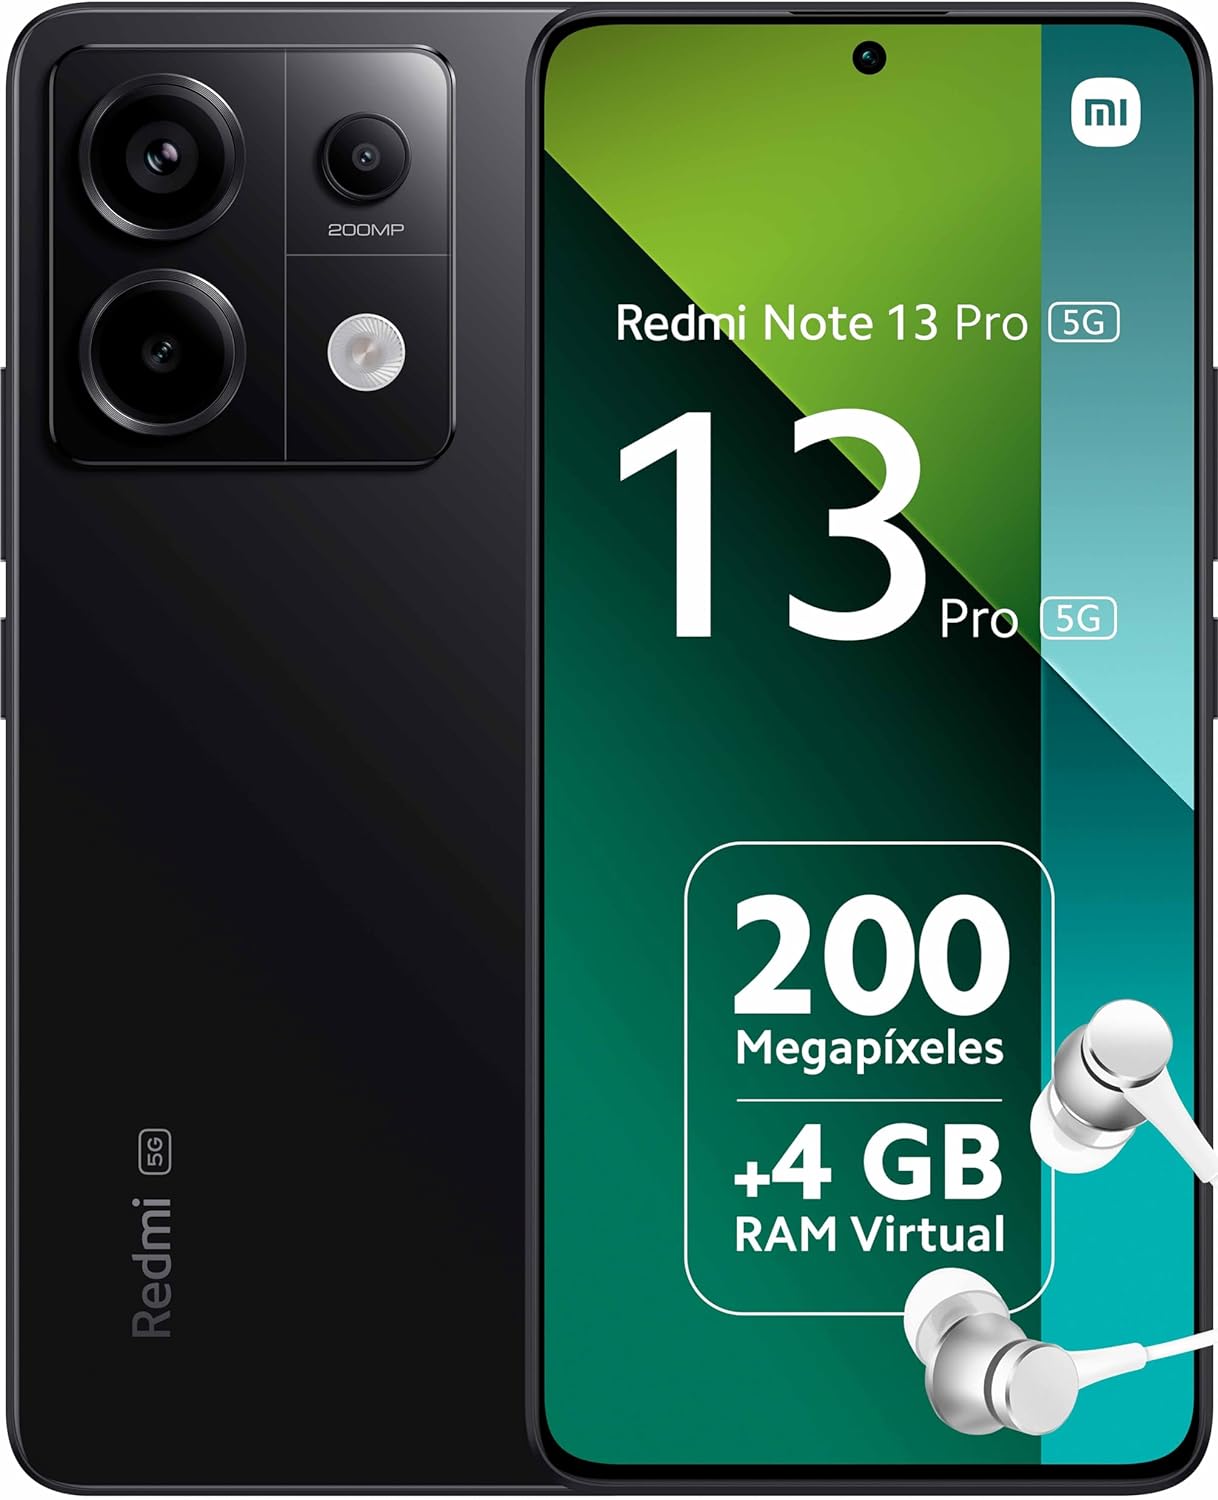 This image features a smartphone, specifically the Redmi Note 13 Pro by Xiaomi. The phone has a modern design with a punch-hole camera in the top center of the display and a square camera module at the back with multiple lenses, one prominently labeled 200MP, indicating a high-resolution camera sensor.